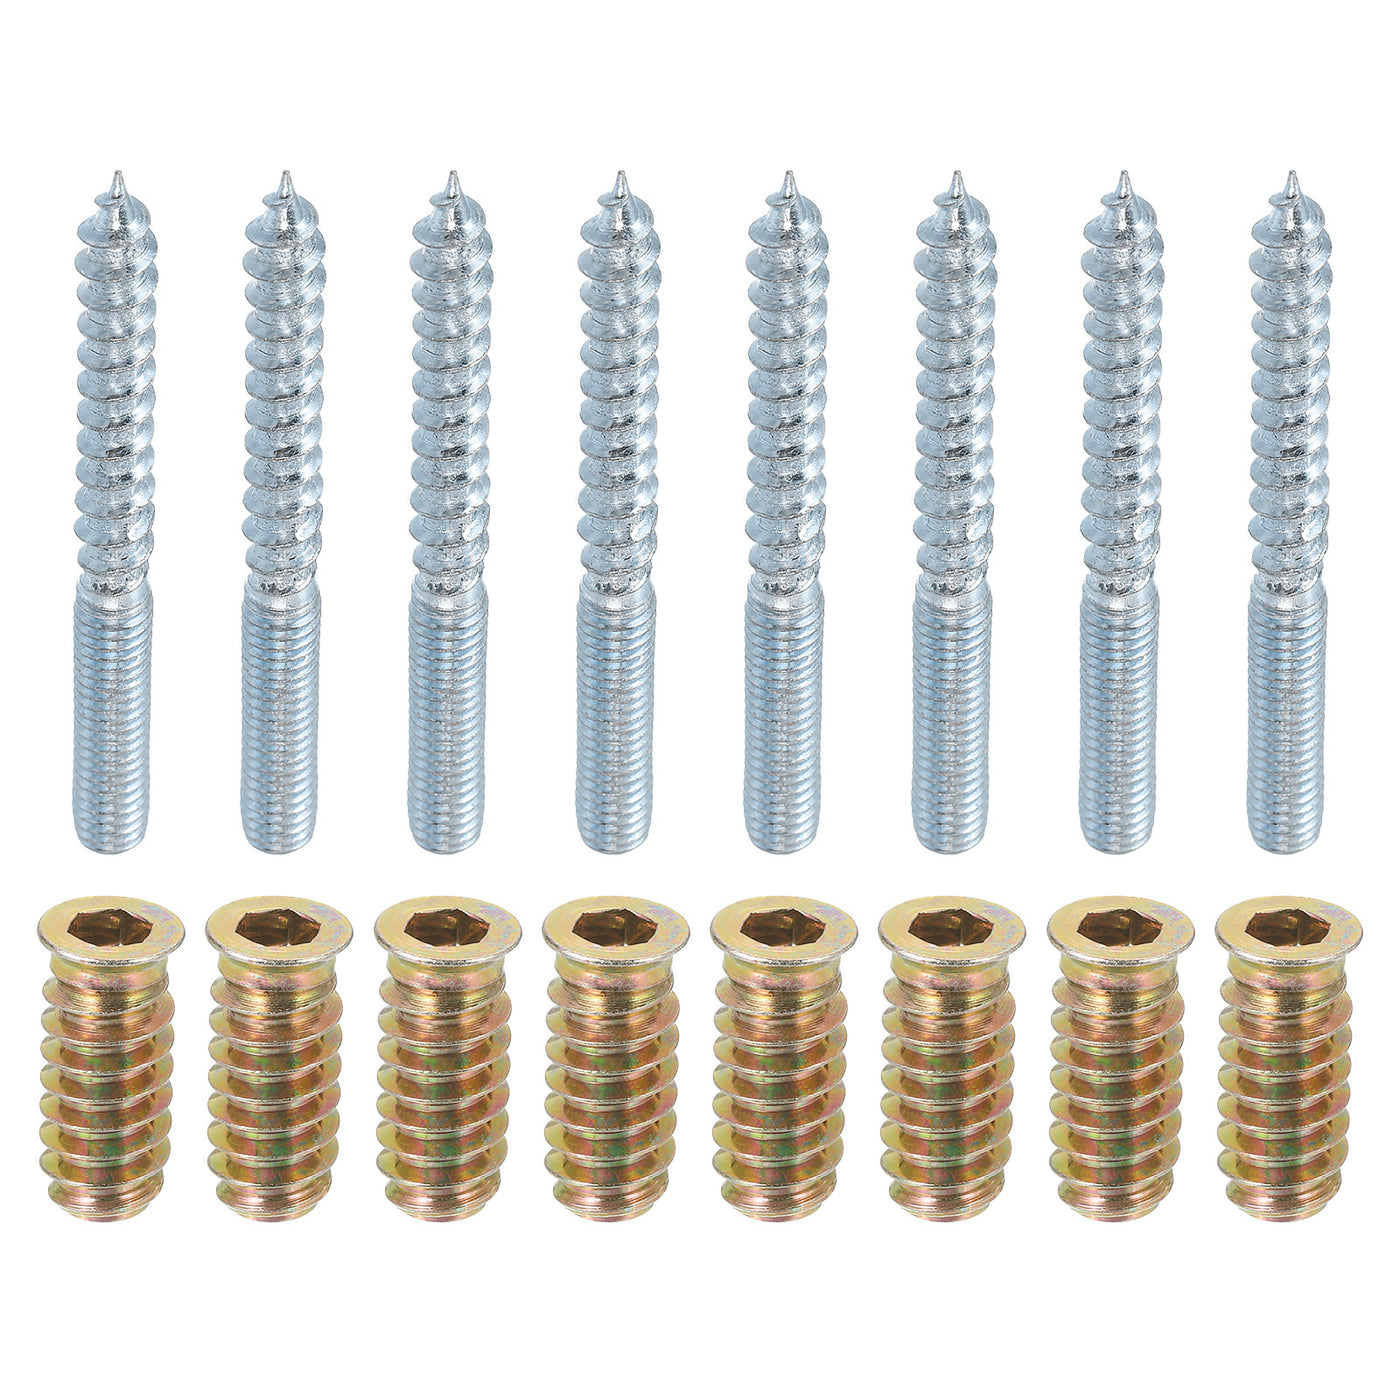 uxcell Uxcell 8pcs M6x60mm Hanger Bolts with 8pcs M6x24mm Threaded Insert Nuts Interface